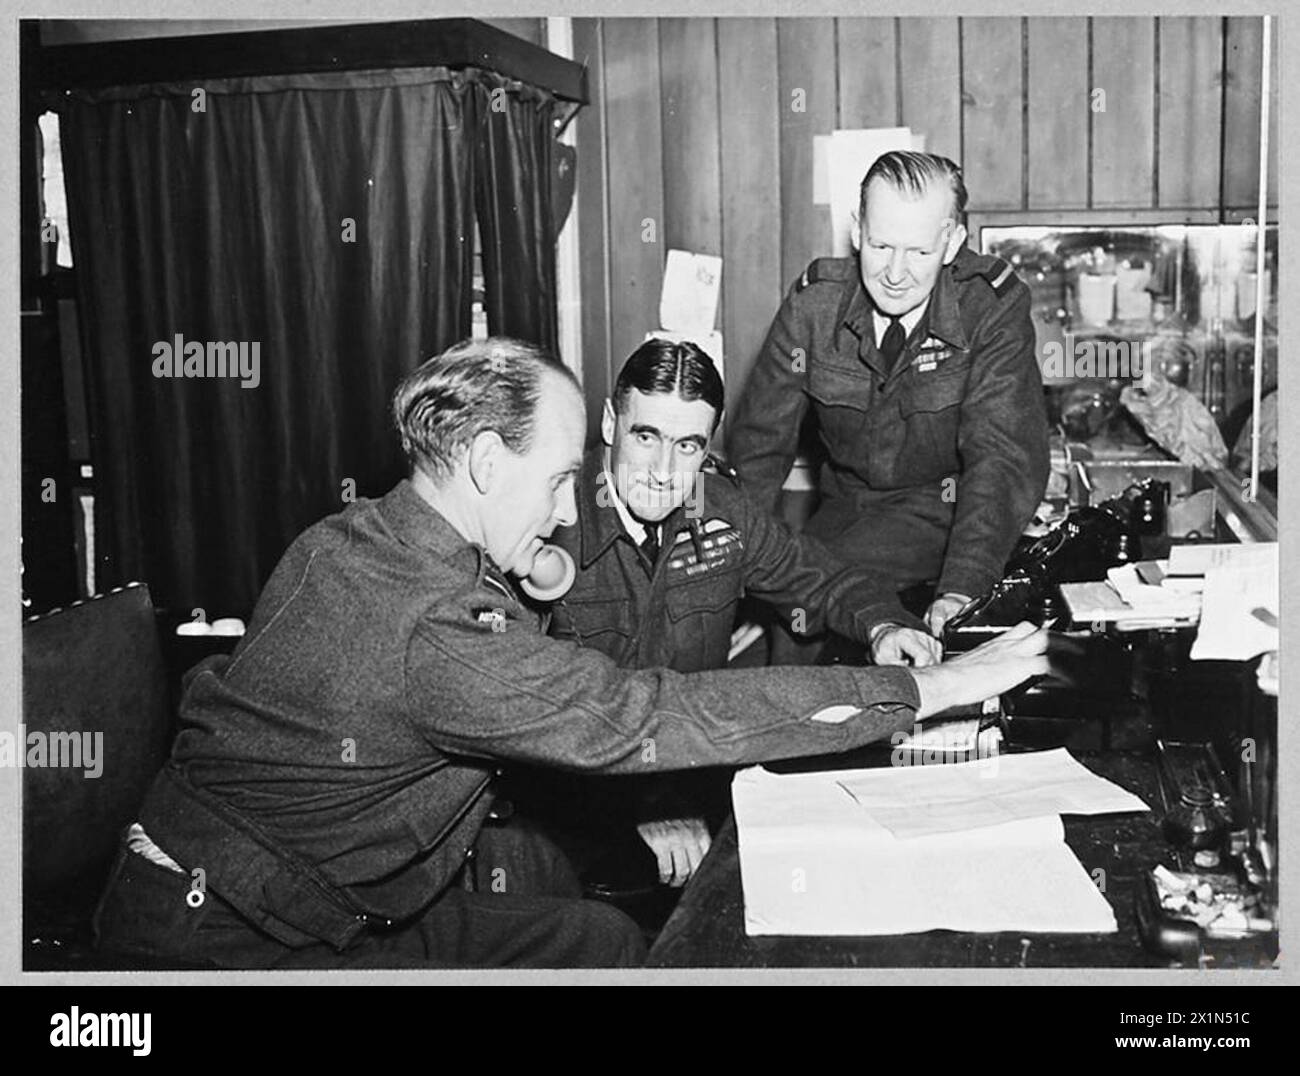 IN COASTAL COMMAND 'OPS' ROOM - Picture (issued 1944) shows - Air Vice Marshal B.E. Baker, CB.,DSO.,MC.,AFC., Air officer Commanding a Coastal Command Group [centre] with Air Commodore N.H. D'Aeth, CBE., [right] and Wing Commander J.C. Barclay, Royal Air Force Stock Photo